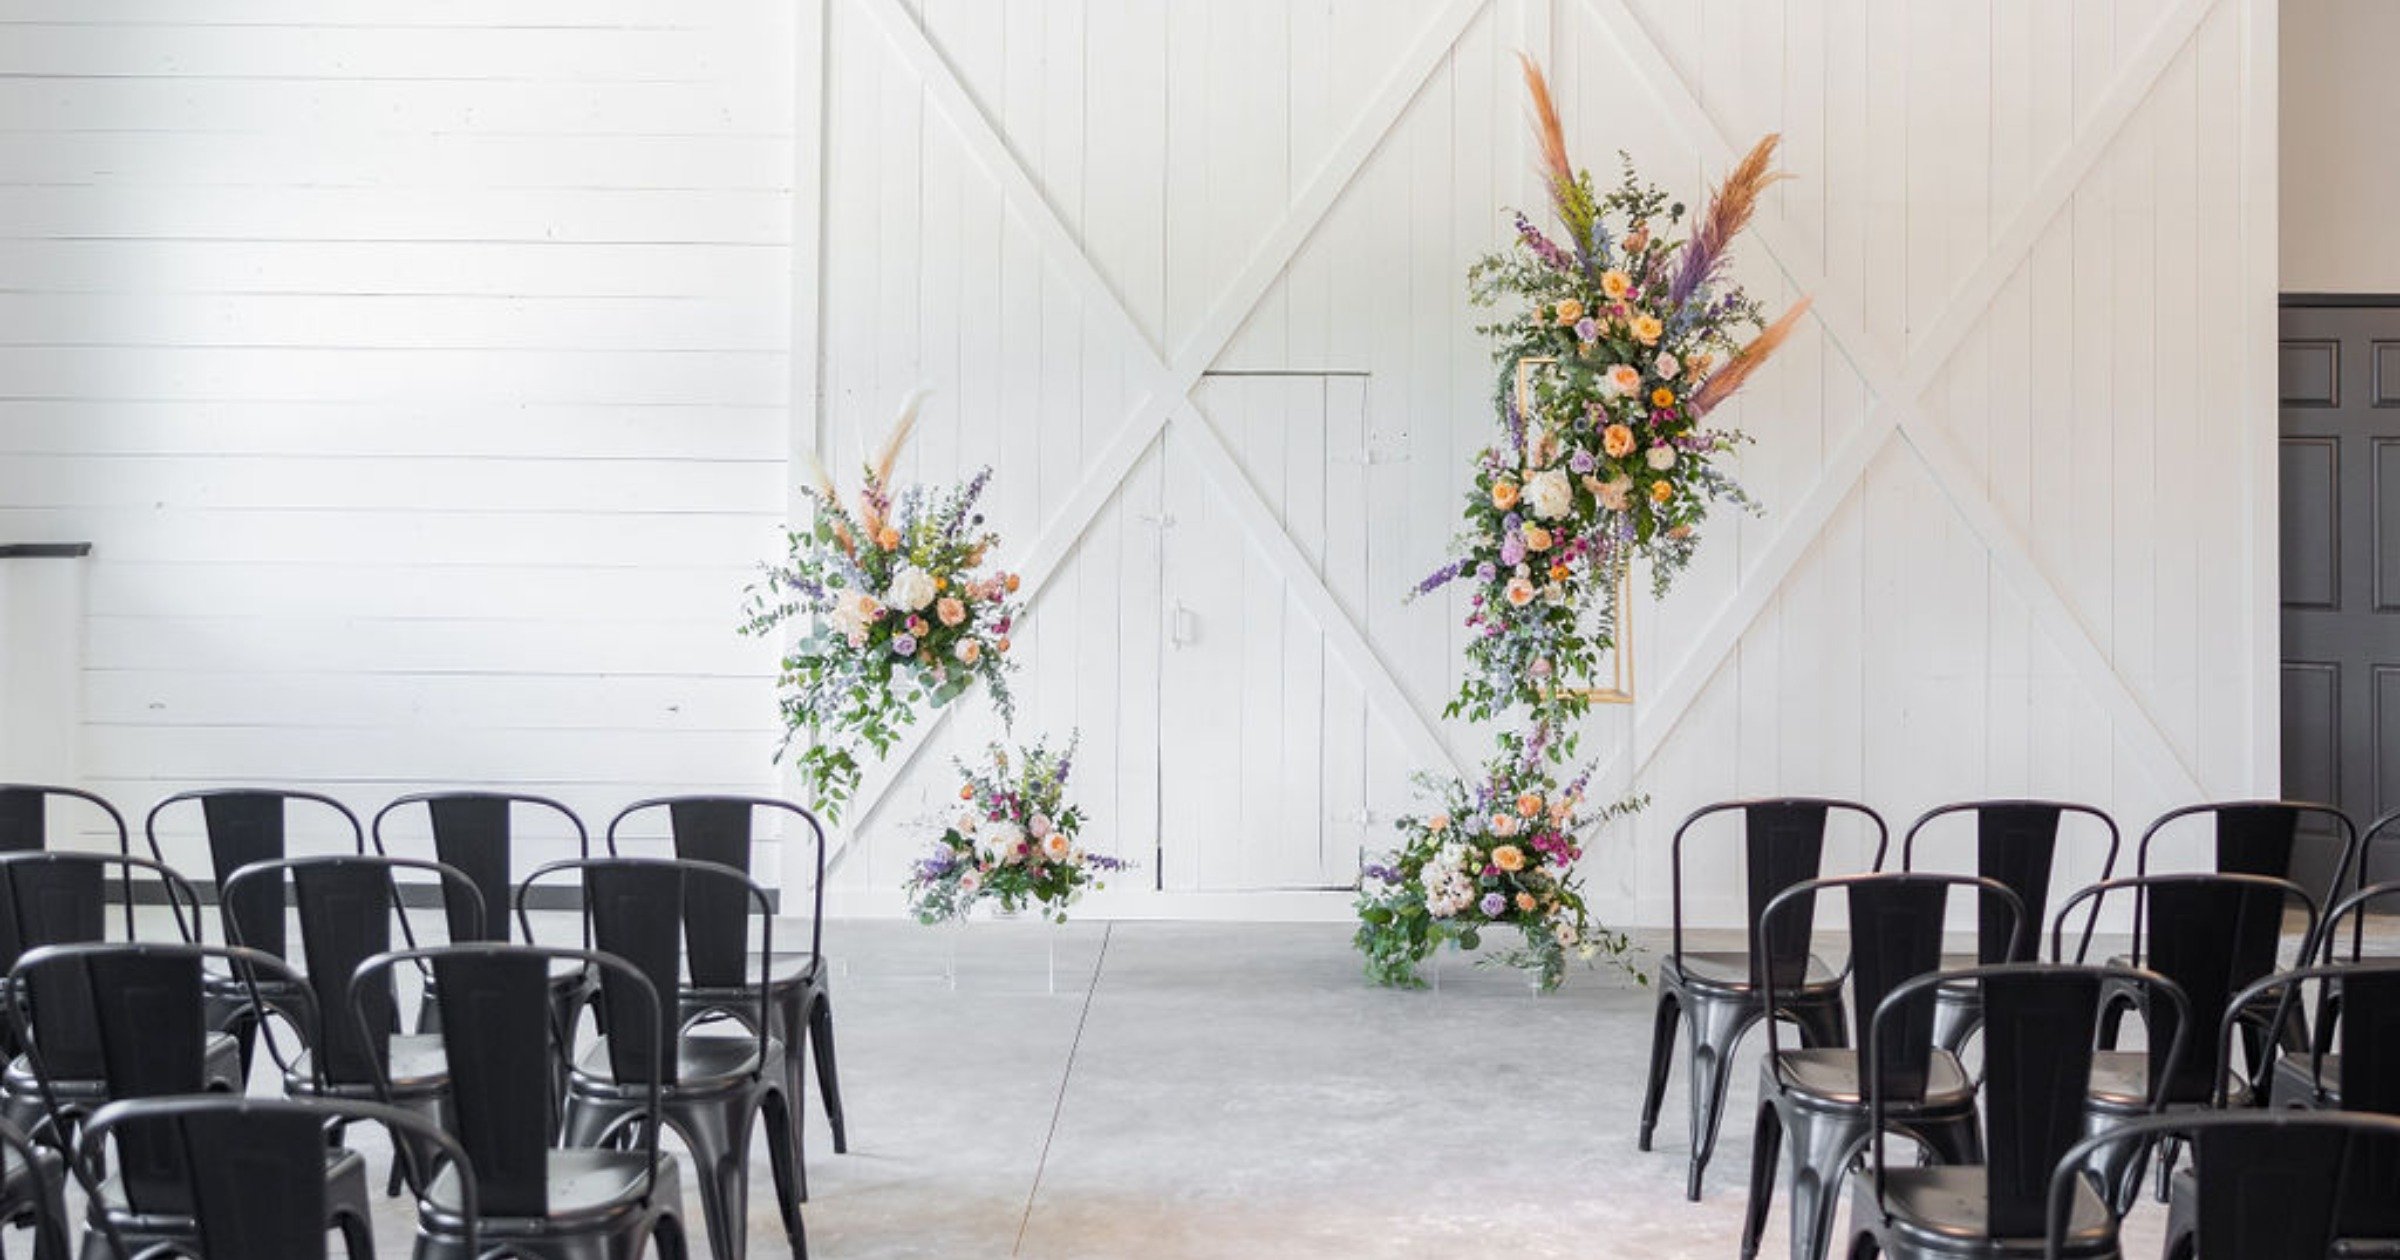 Iridescent Wedding Inspiration At Rivers Edge That Is Full Of Color